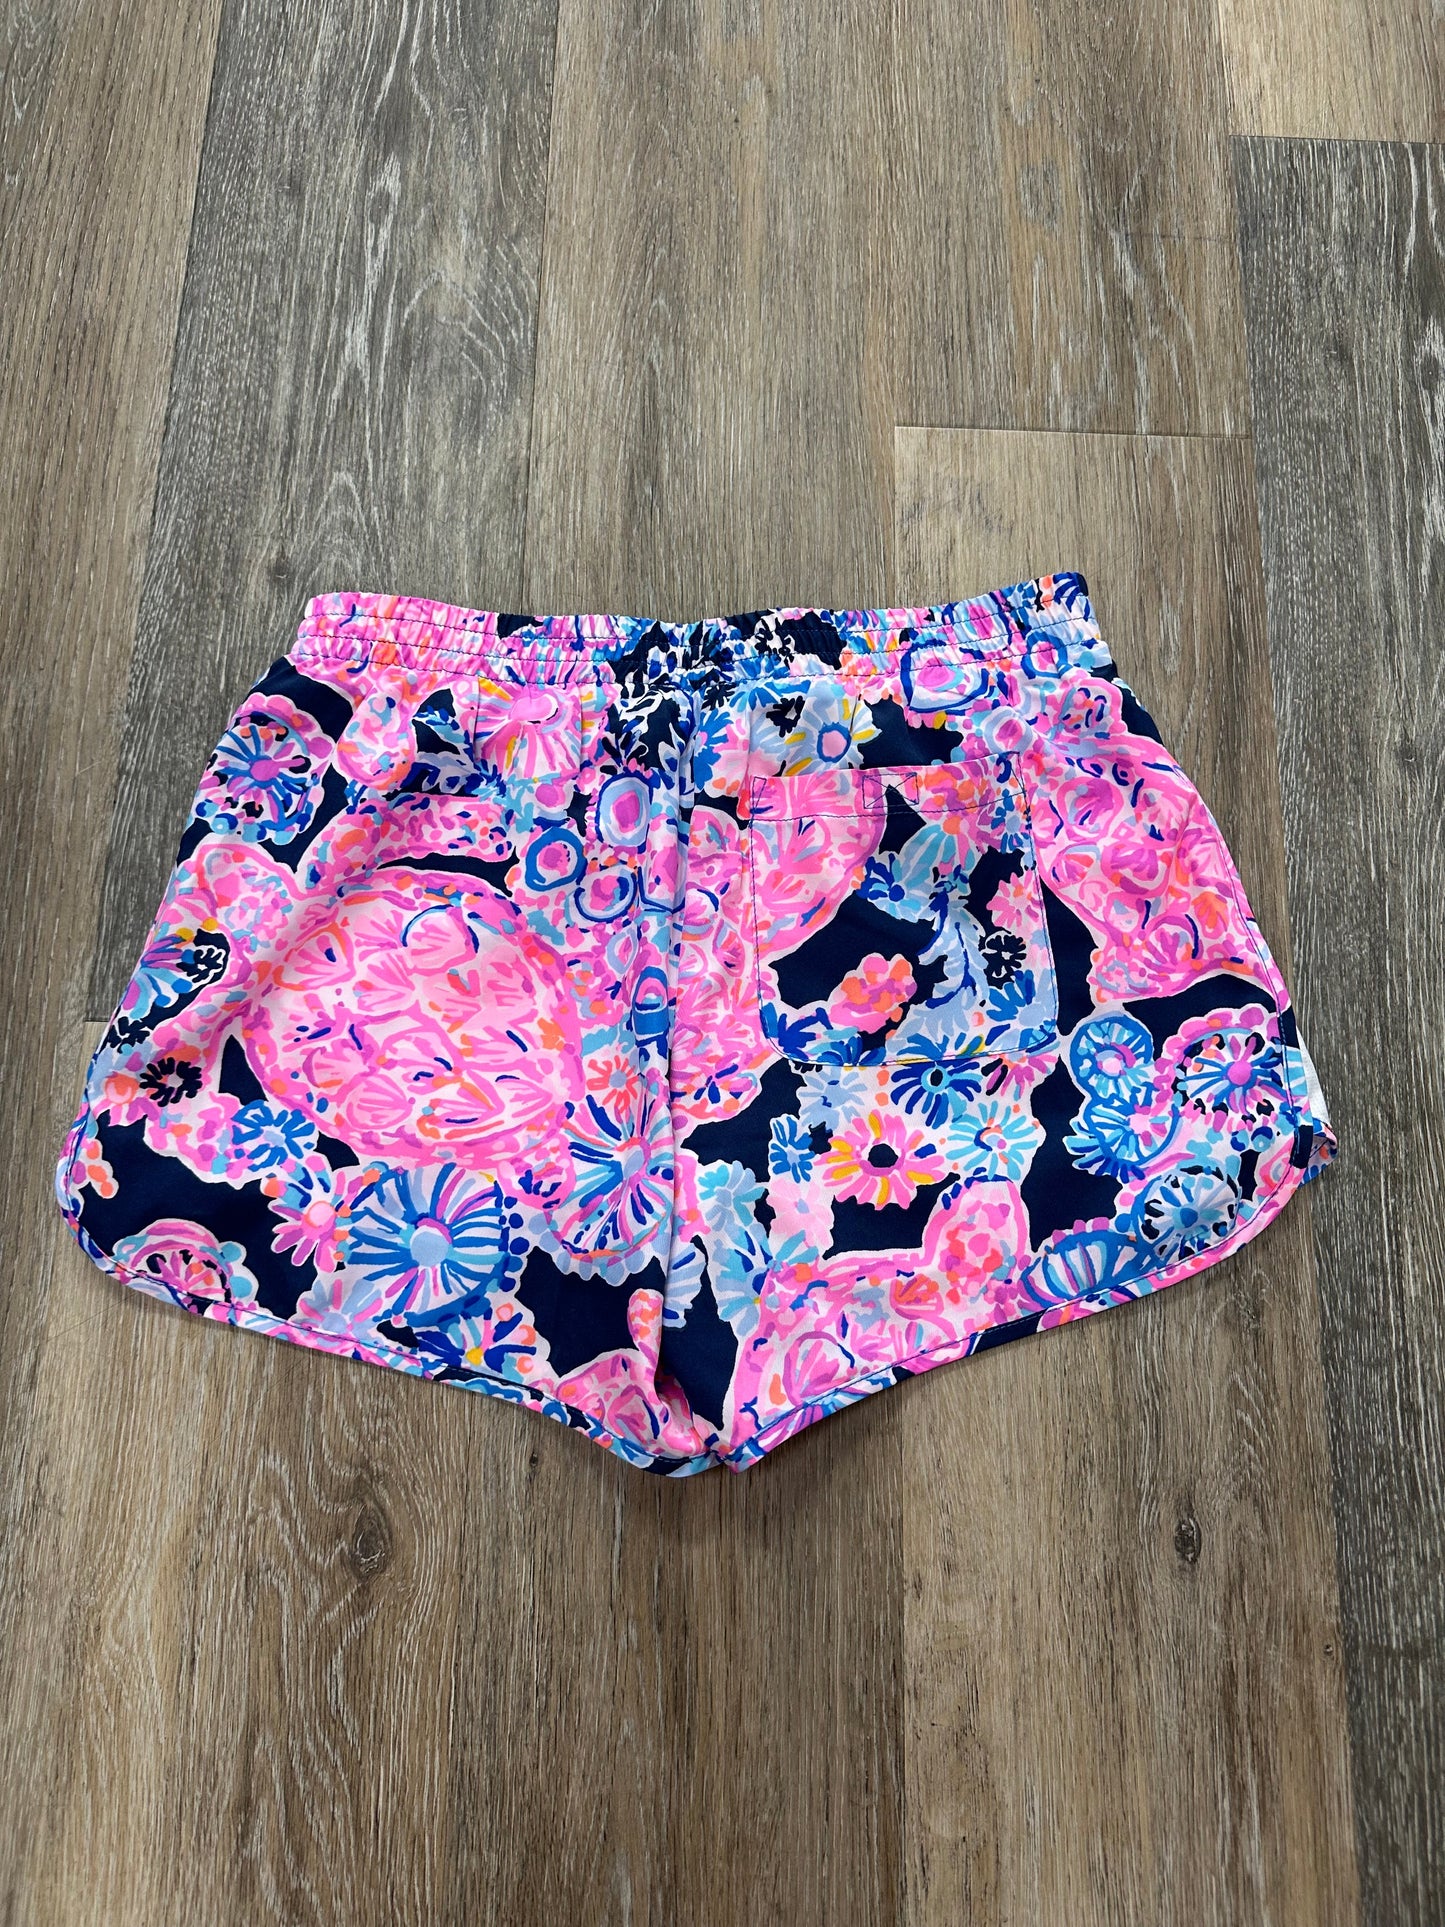 Athletic Shorts By Lilly Pulitzer  Size: Xxs